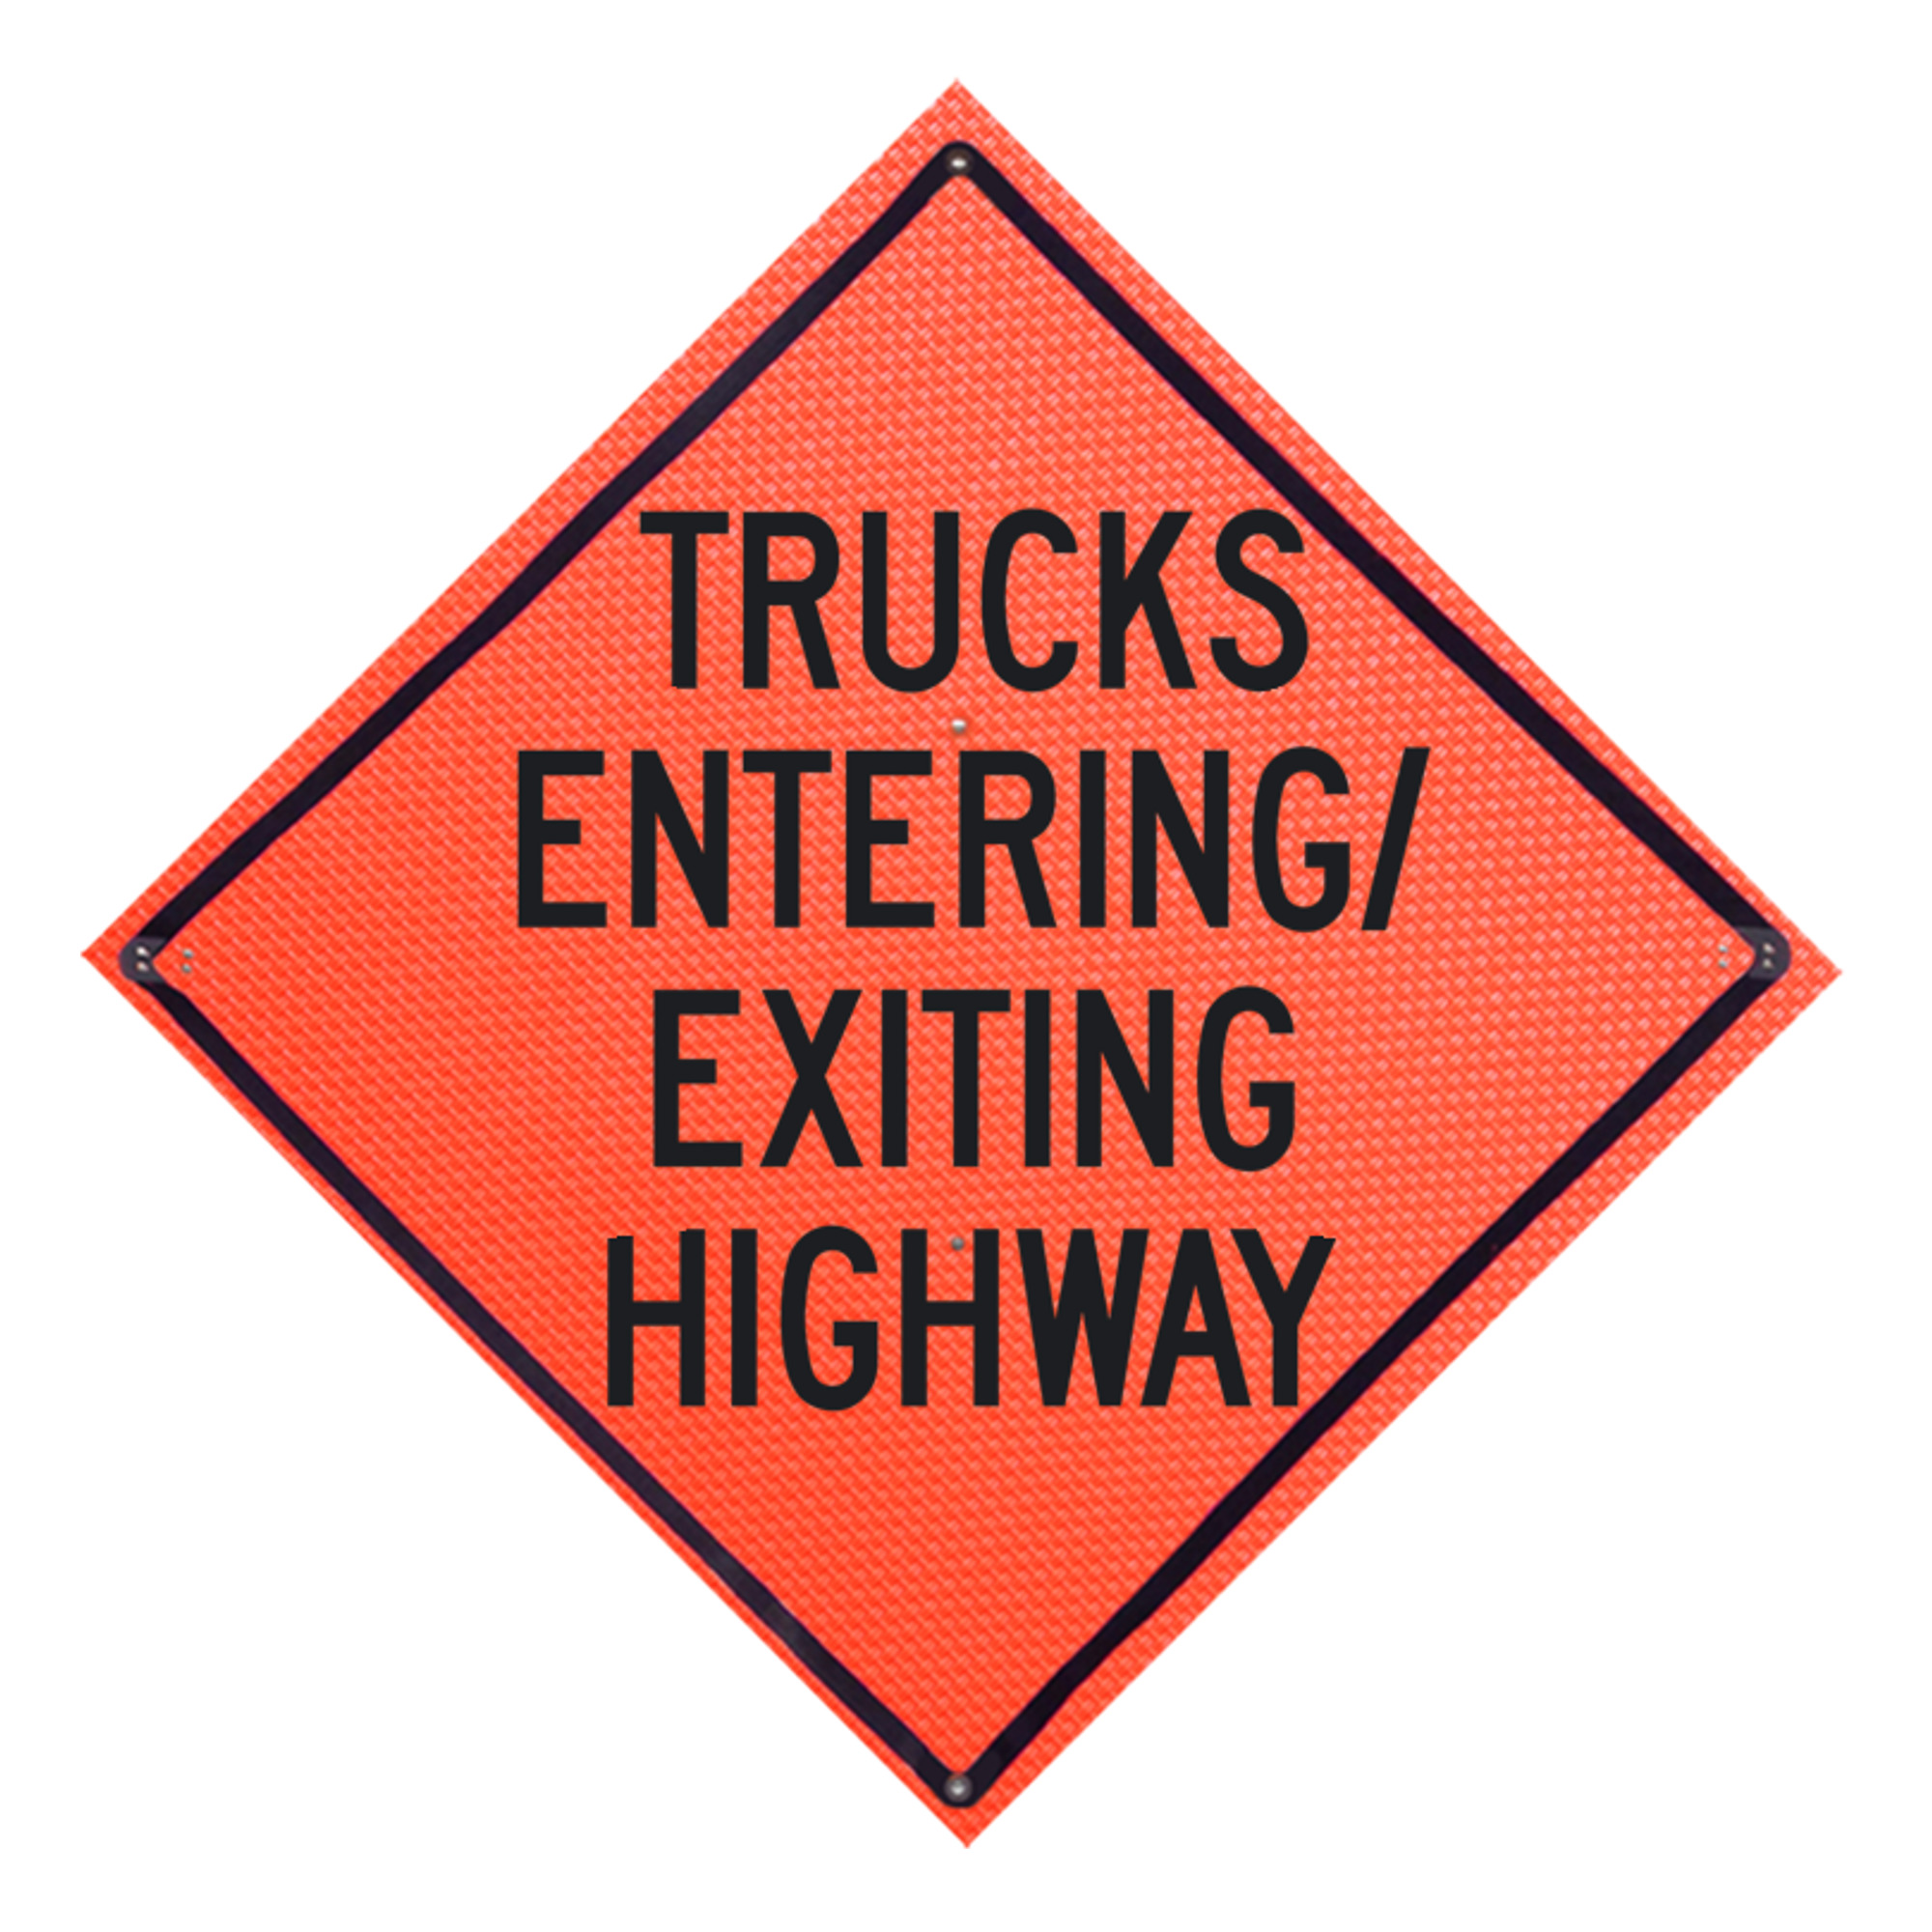 Eastern Metal, Mesh Roll-up Sign, Sign Message TRUCKS ENTERING/EXITING HIGHWAY, Height 36 in, Width 36 in, Model C-36-MO-4LEX-TE/EH